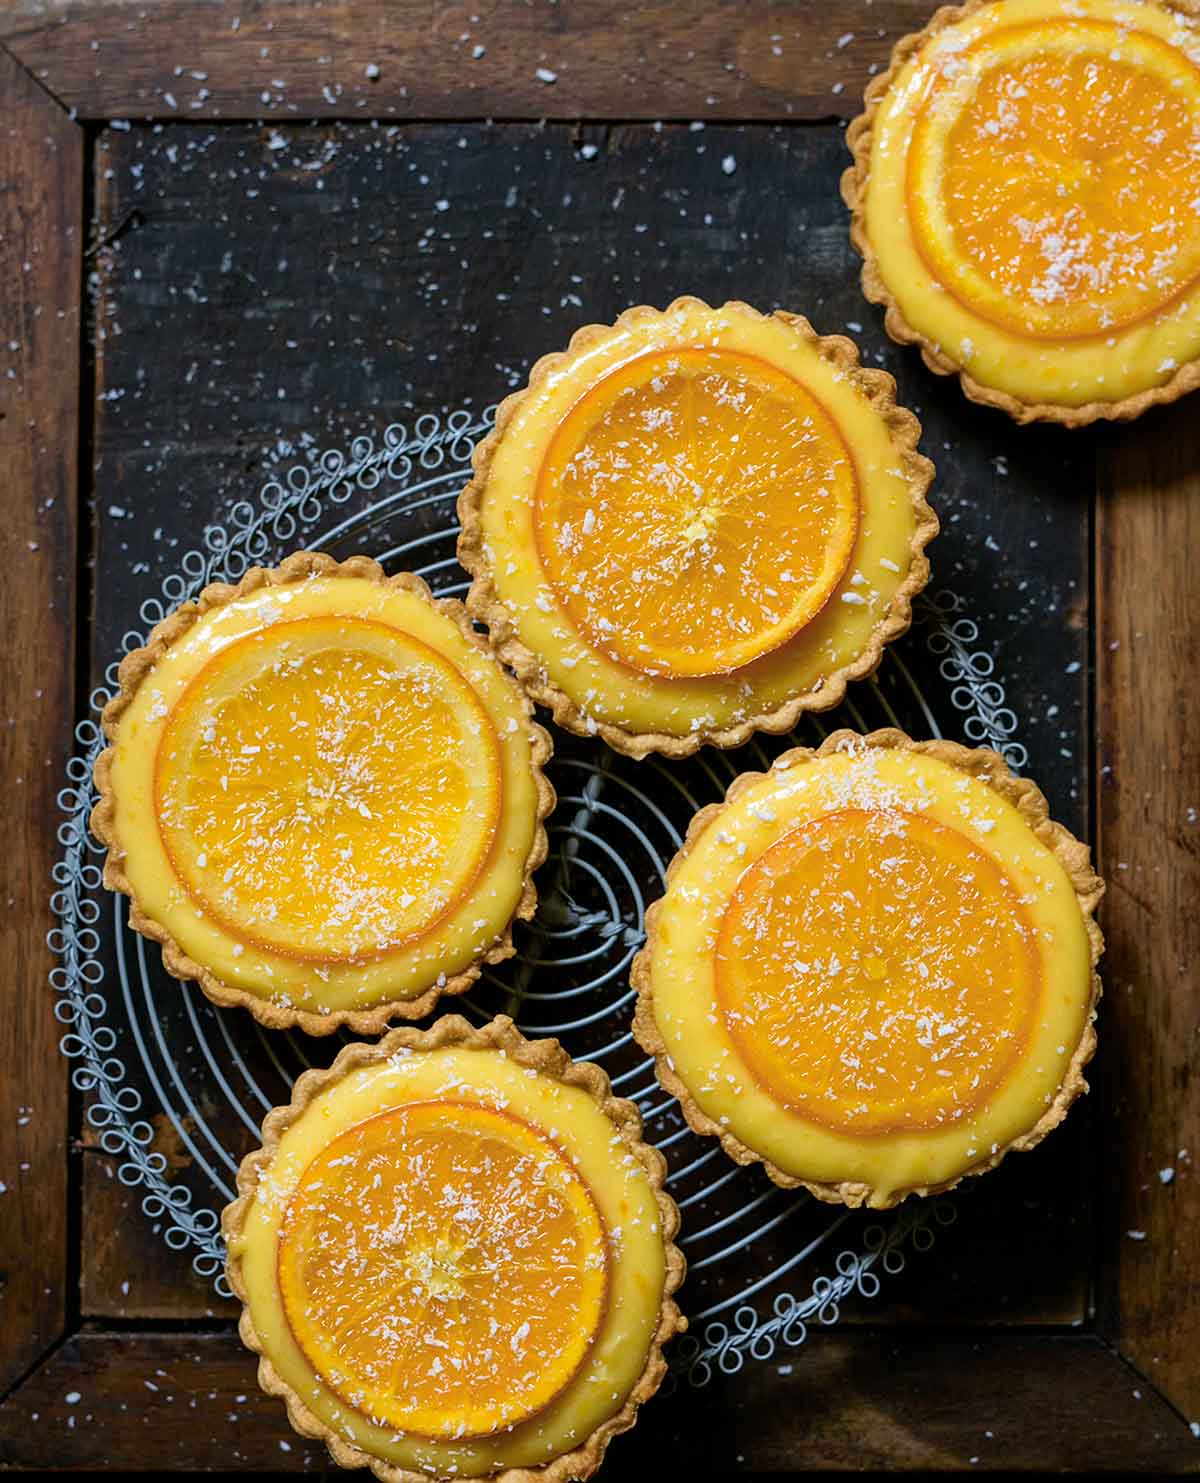 Five small tarts filled with orange curd and topped with candied orange slices on a cooling rack.